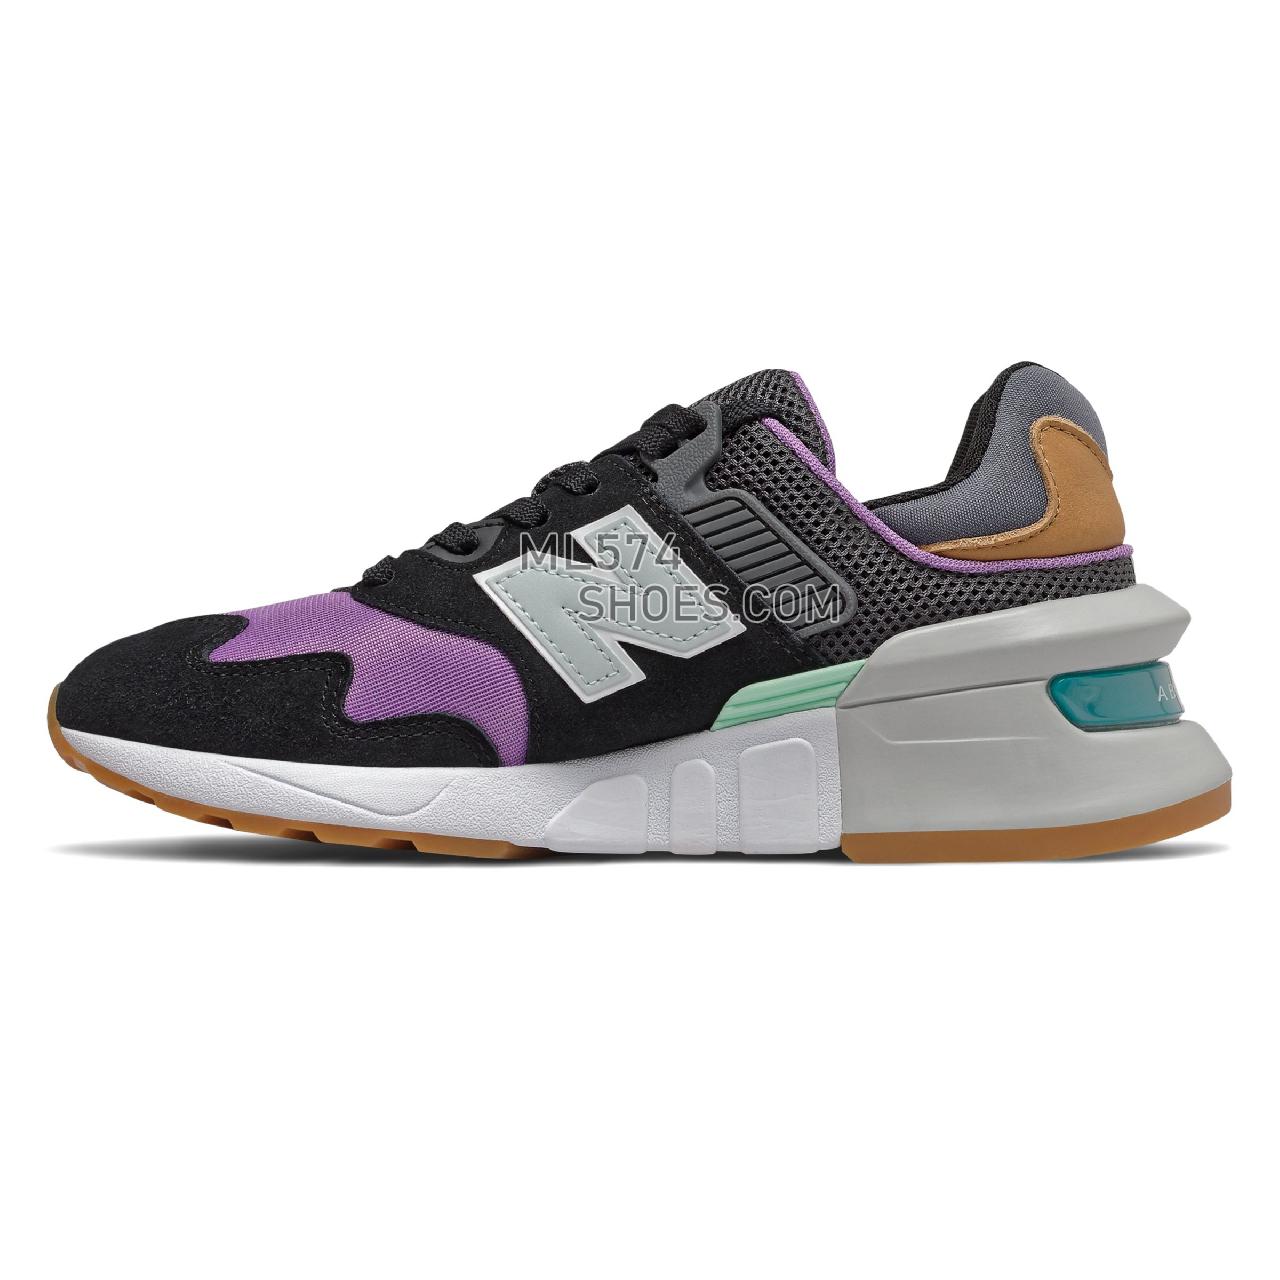 New Balance 997 Sport - Women's Sport Style Sneakers - Black with Neo Violet - WS997JGC